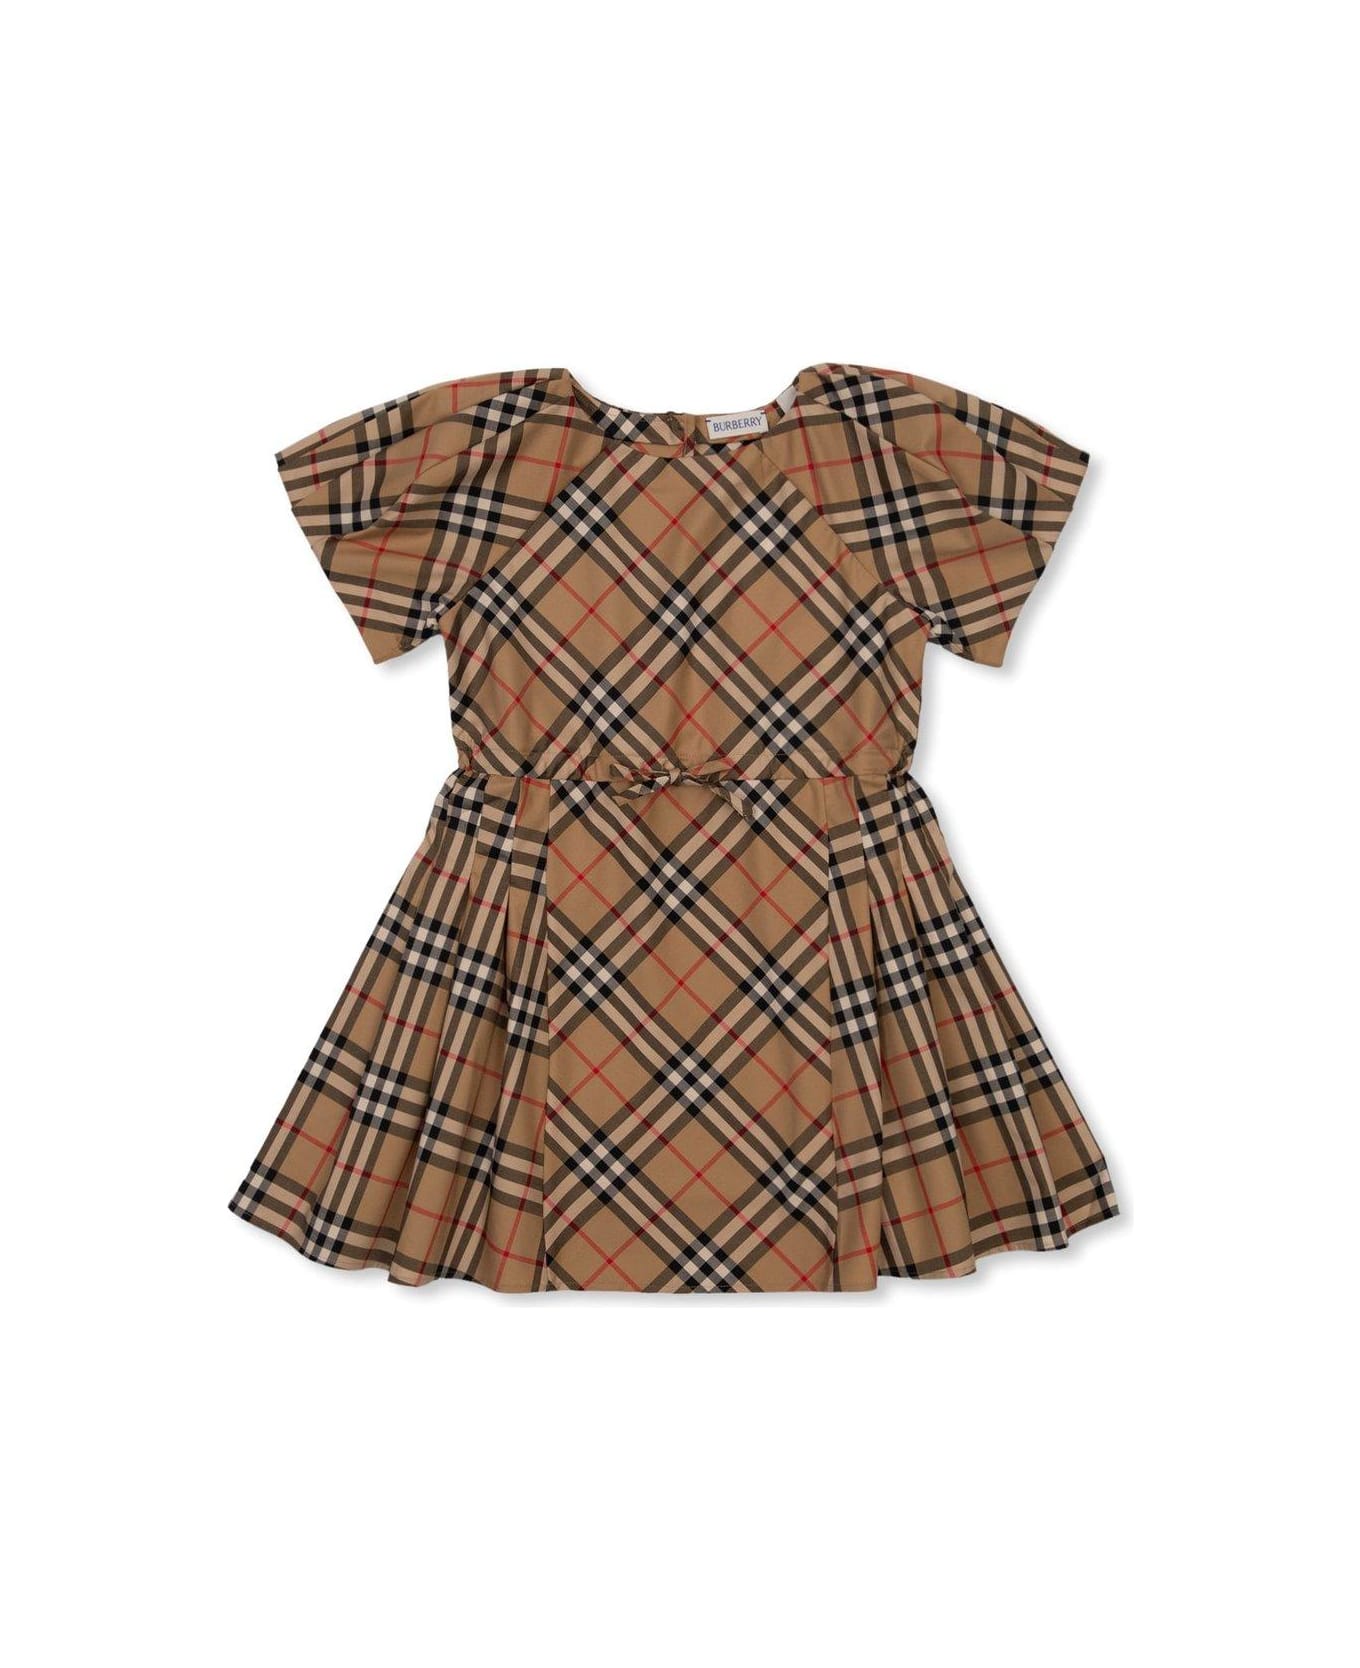 Burberry Checked Short-sleeved Dress - Archive beige ip chk